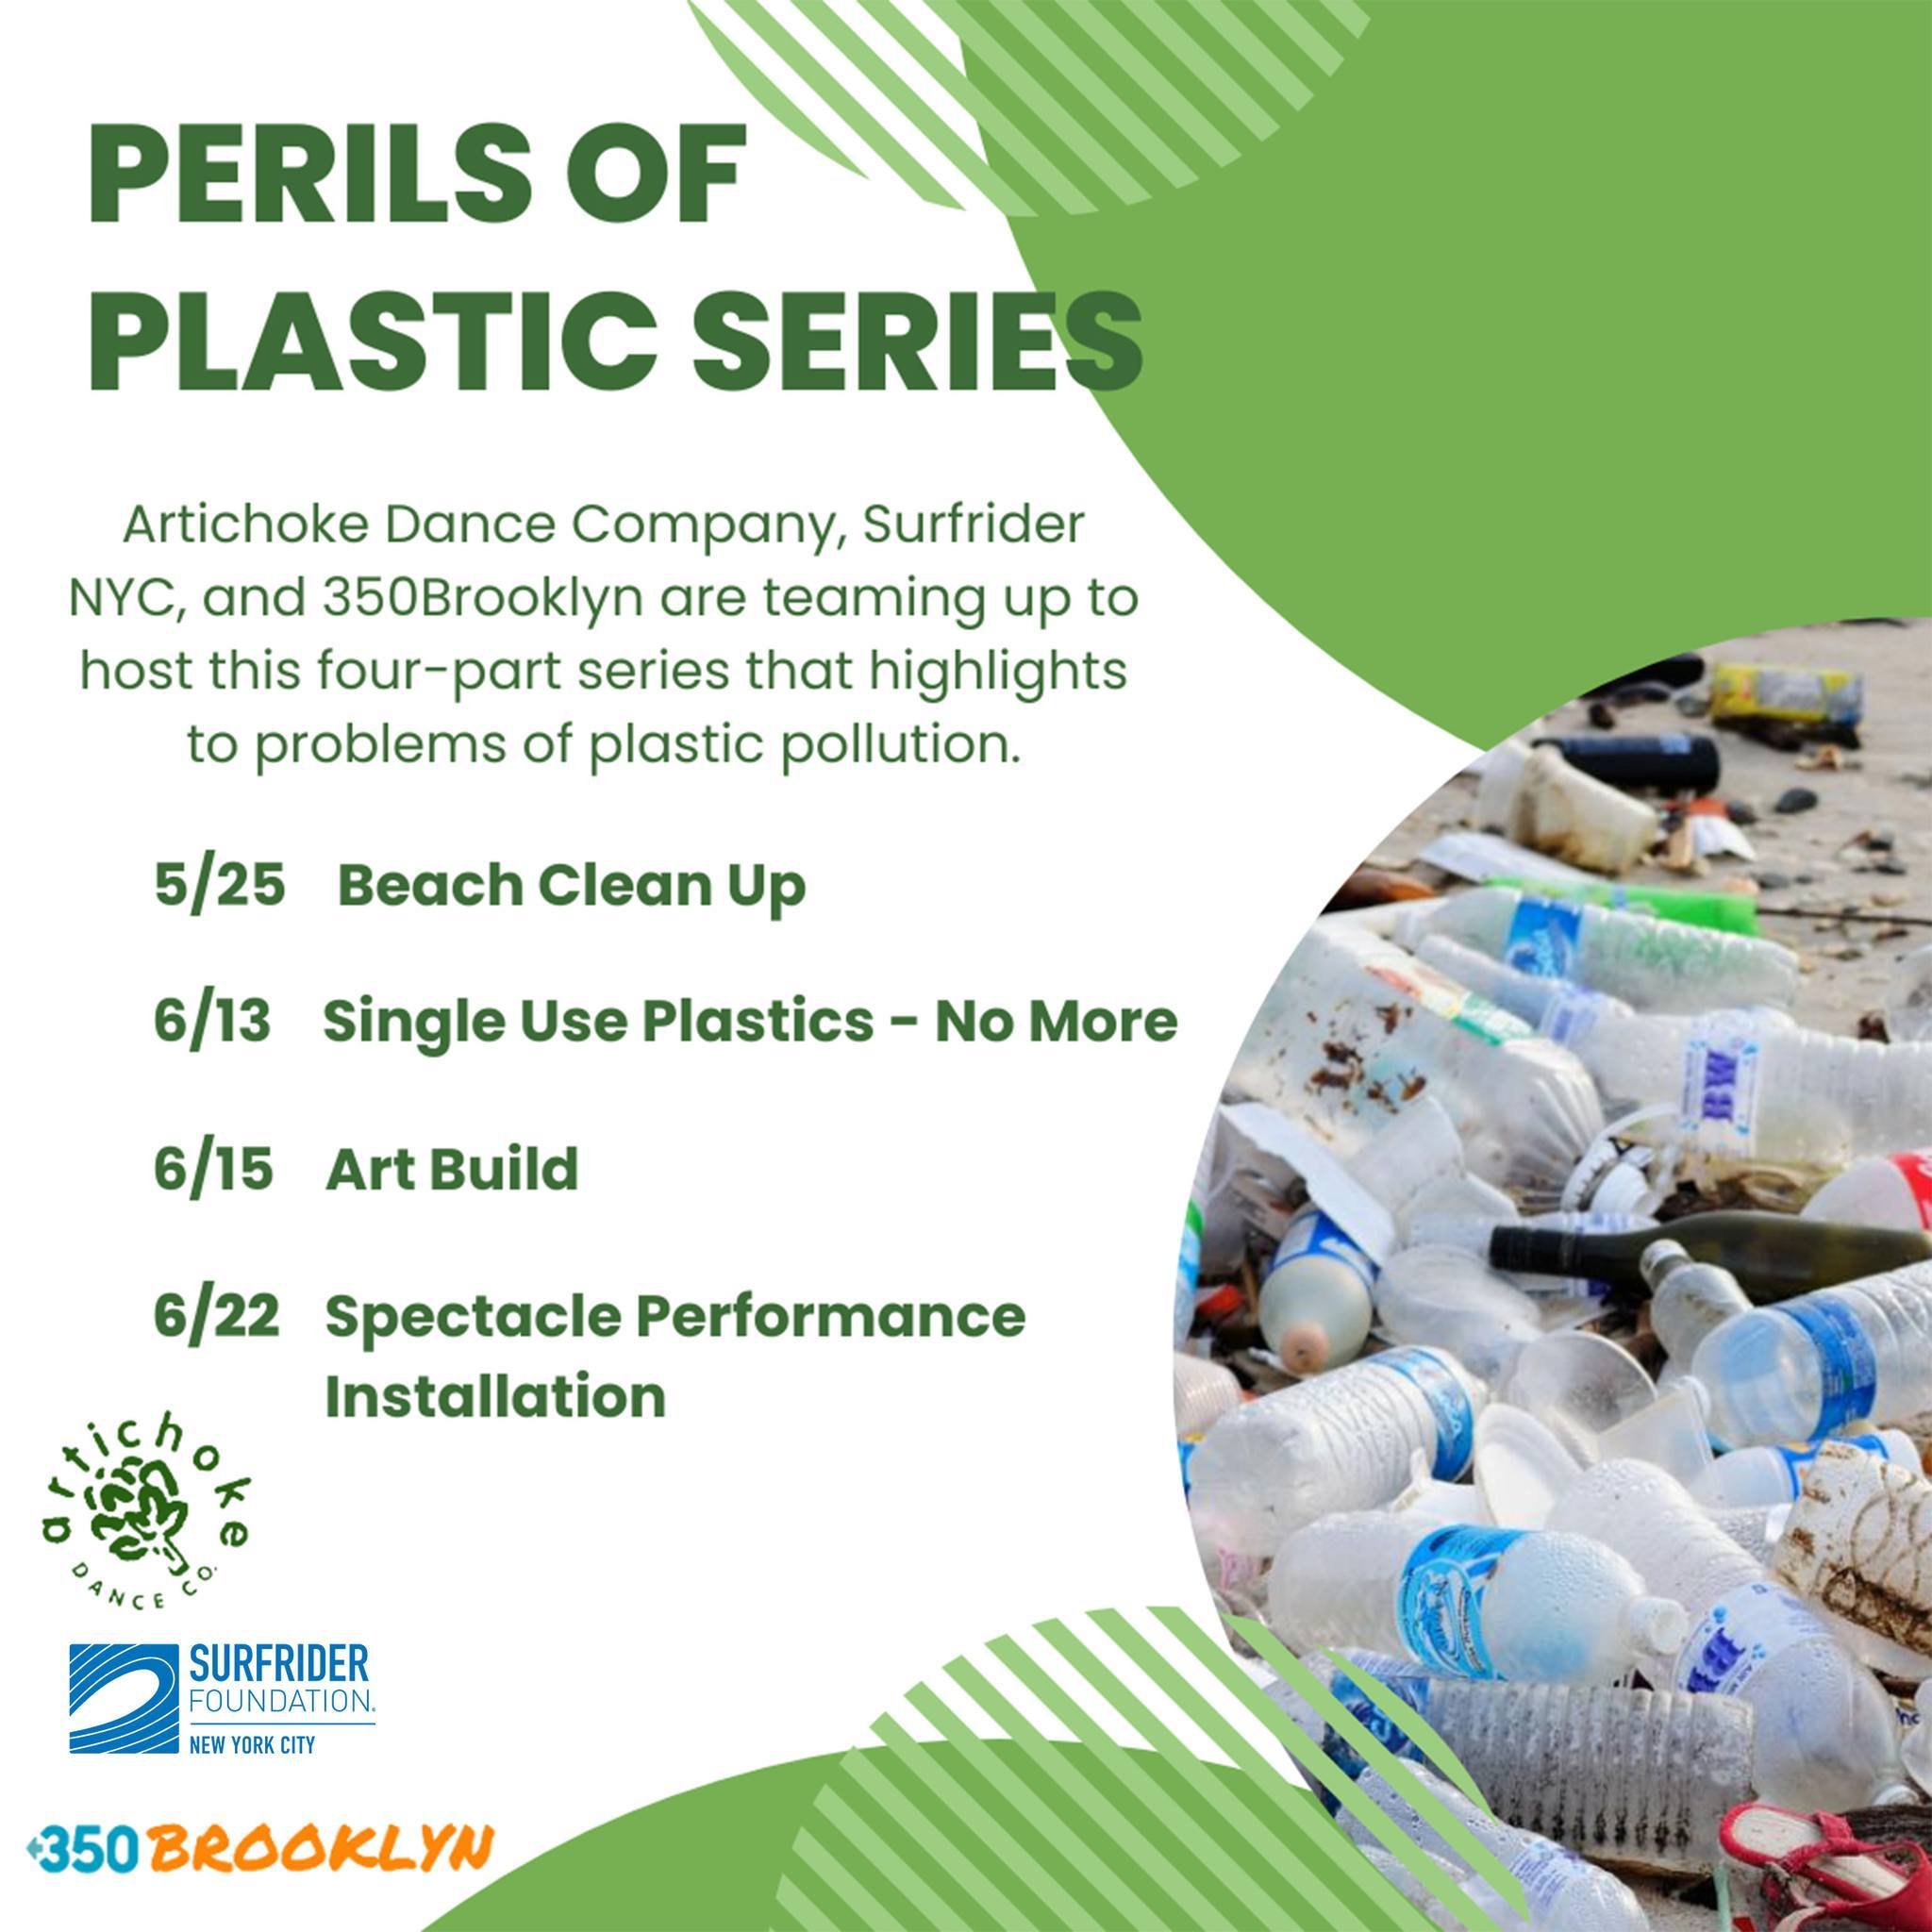 We are SO excited to announce our Perils of Plastic Series, created and hosted in partnership with Surfrider NYC and 350Brooklyn. 🌎 

The series aims to educate and engage the NYC Community about plastic pollution and will feature:

🌎A Beach Clean 